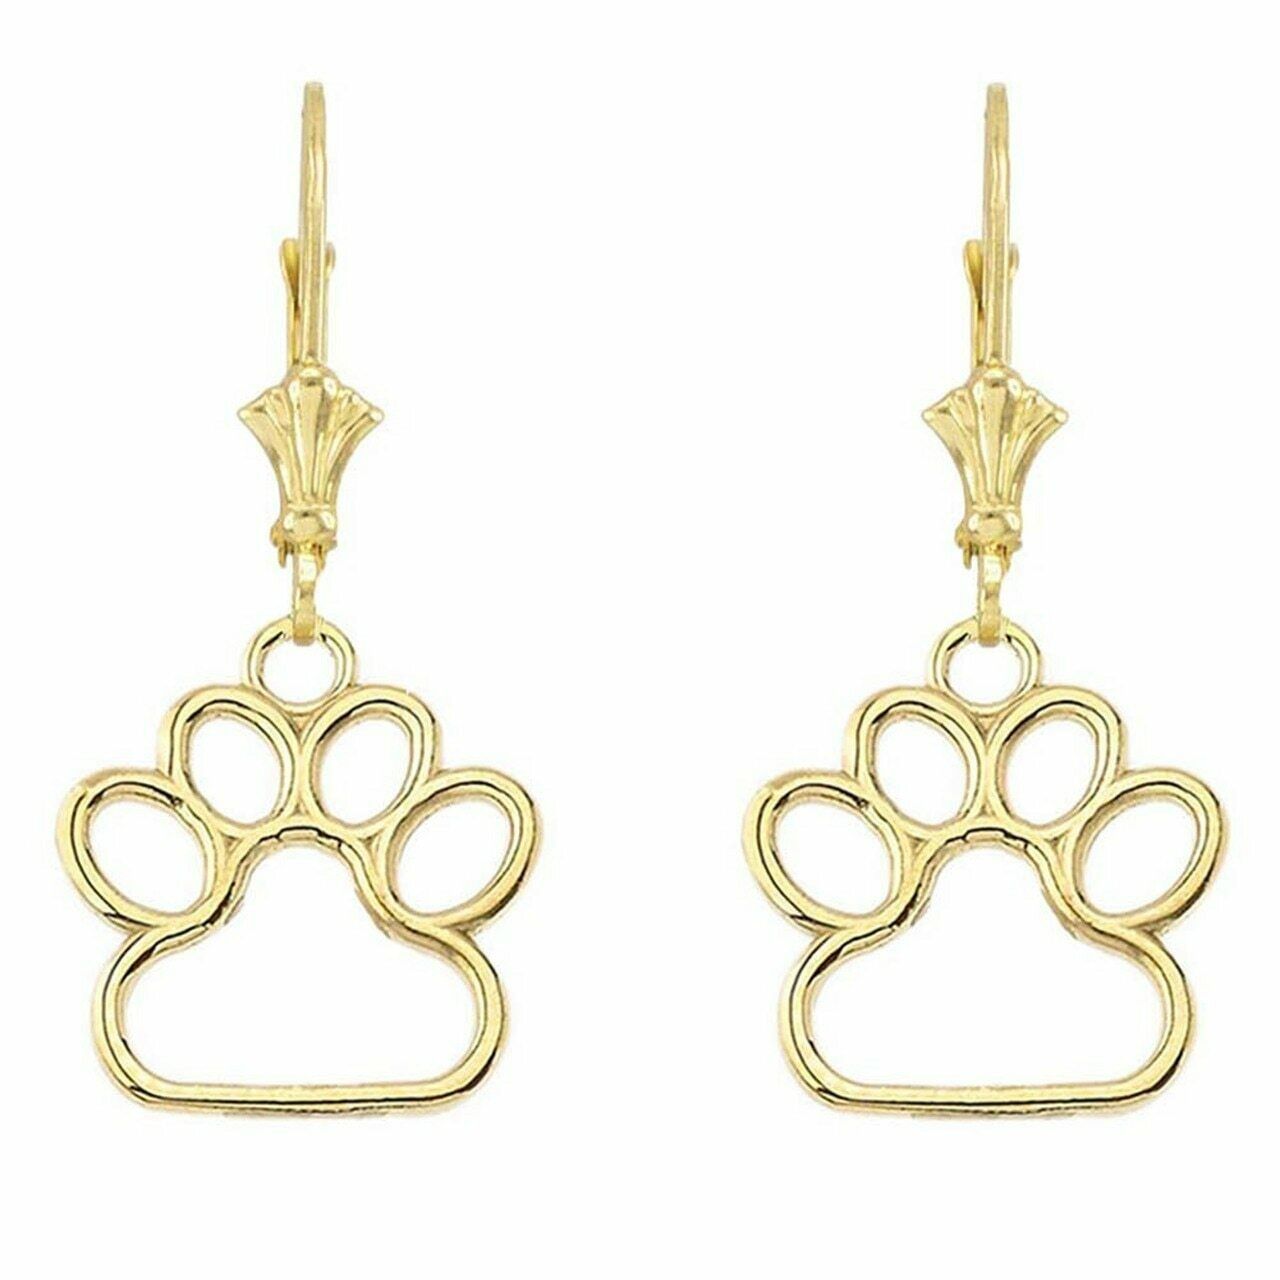 10k Yellow Gold Dainty Dog Paw Print Leverback Earrings (Small)